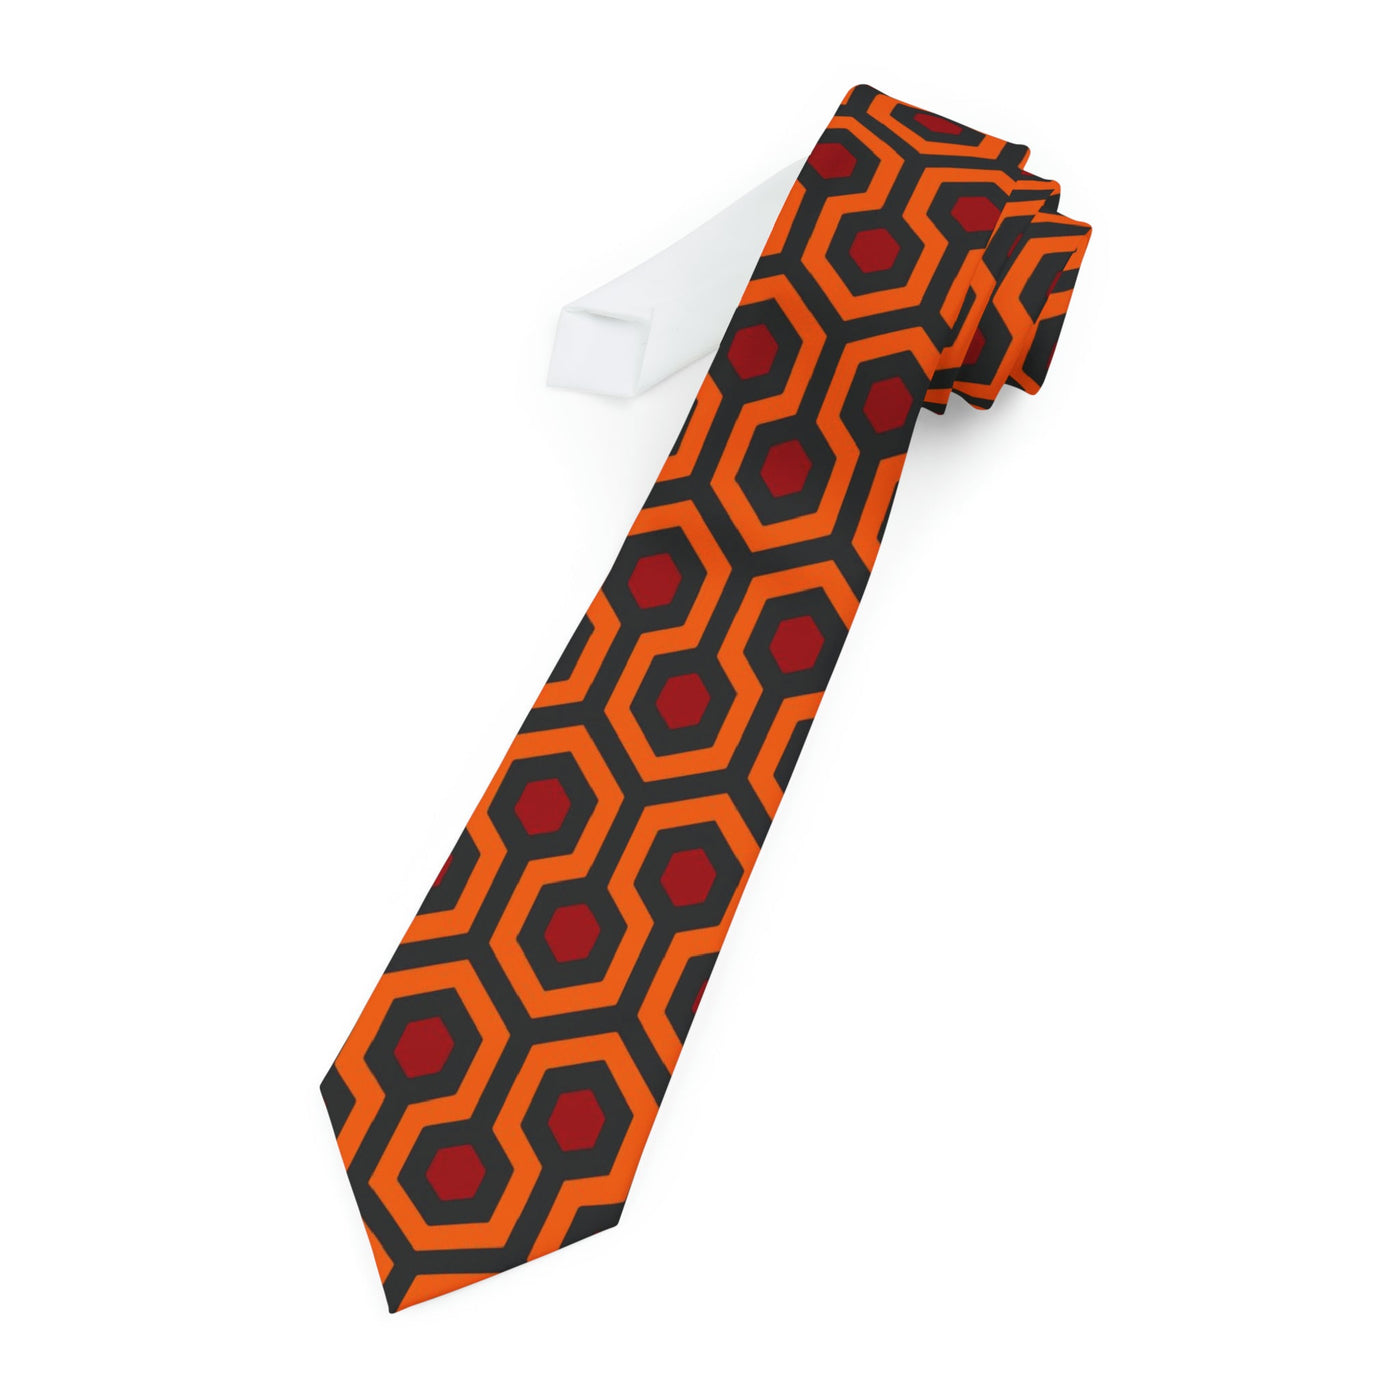 The Shining Necktie with Overlook Hotel Carpet Pattern